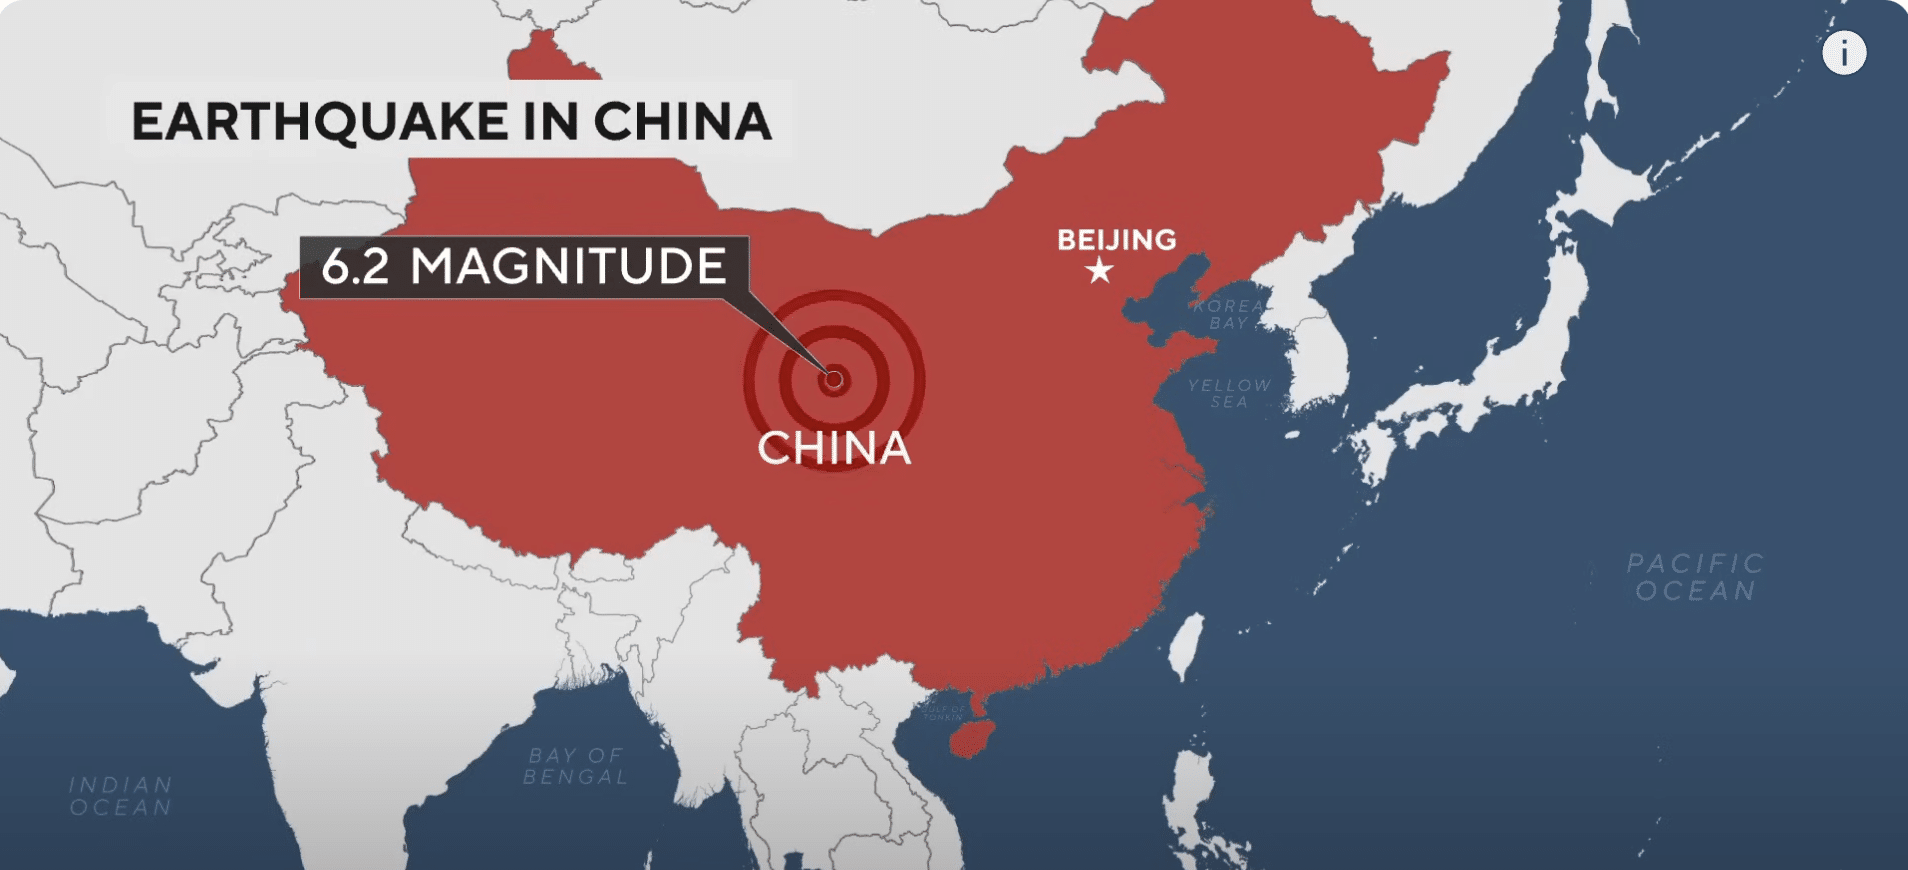 UPDATE: Powerful earthquake in China is deadliest in 9 years leaving at least 131 killed and 700 injured